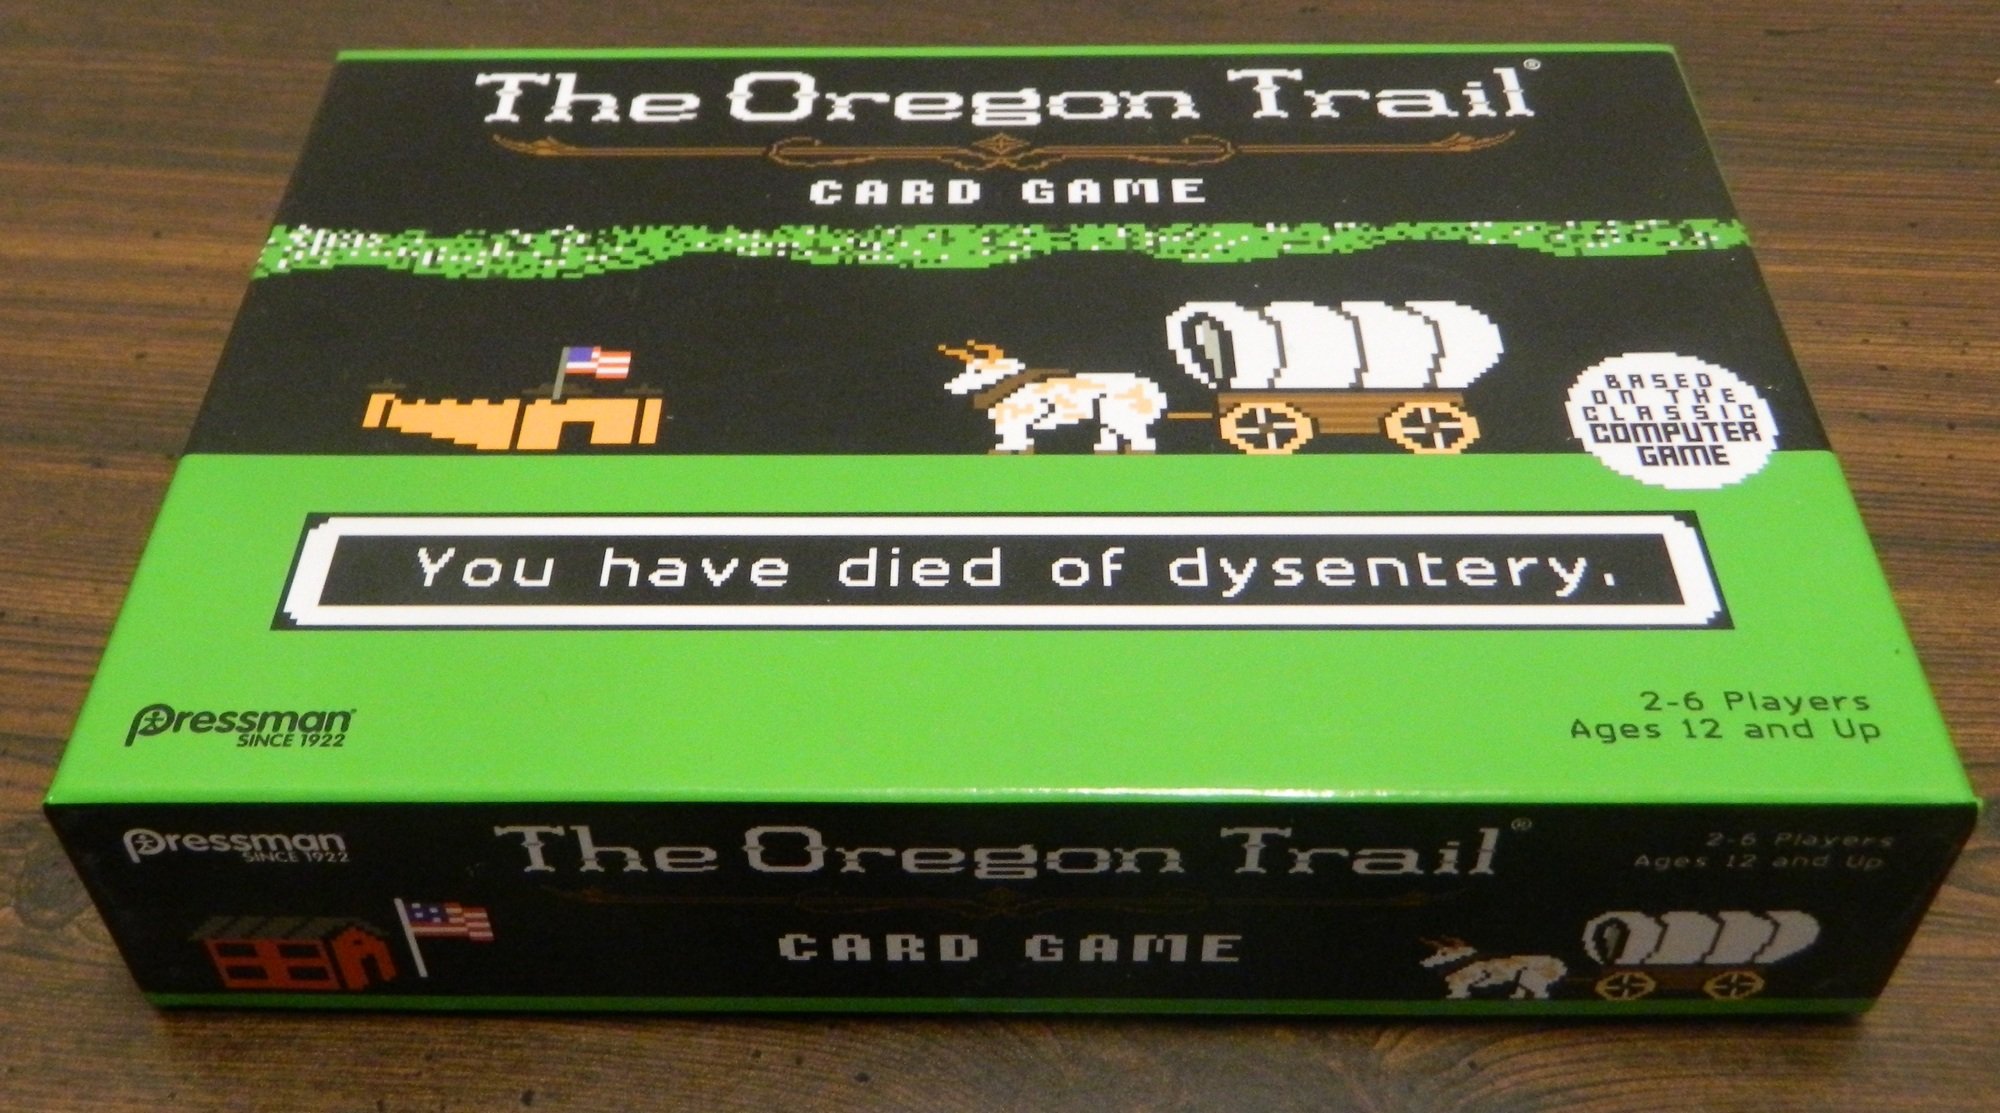 Game Box for the Oregon Trail Card Game